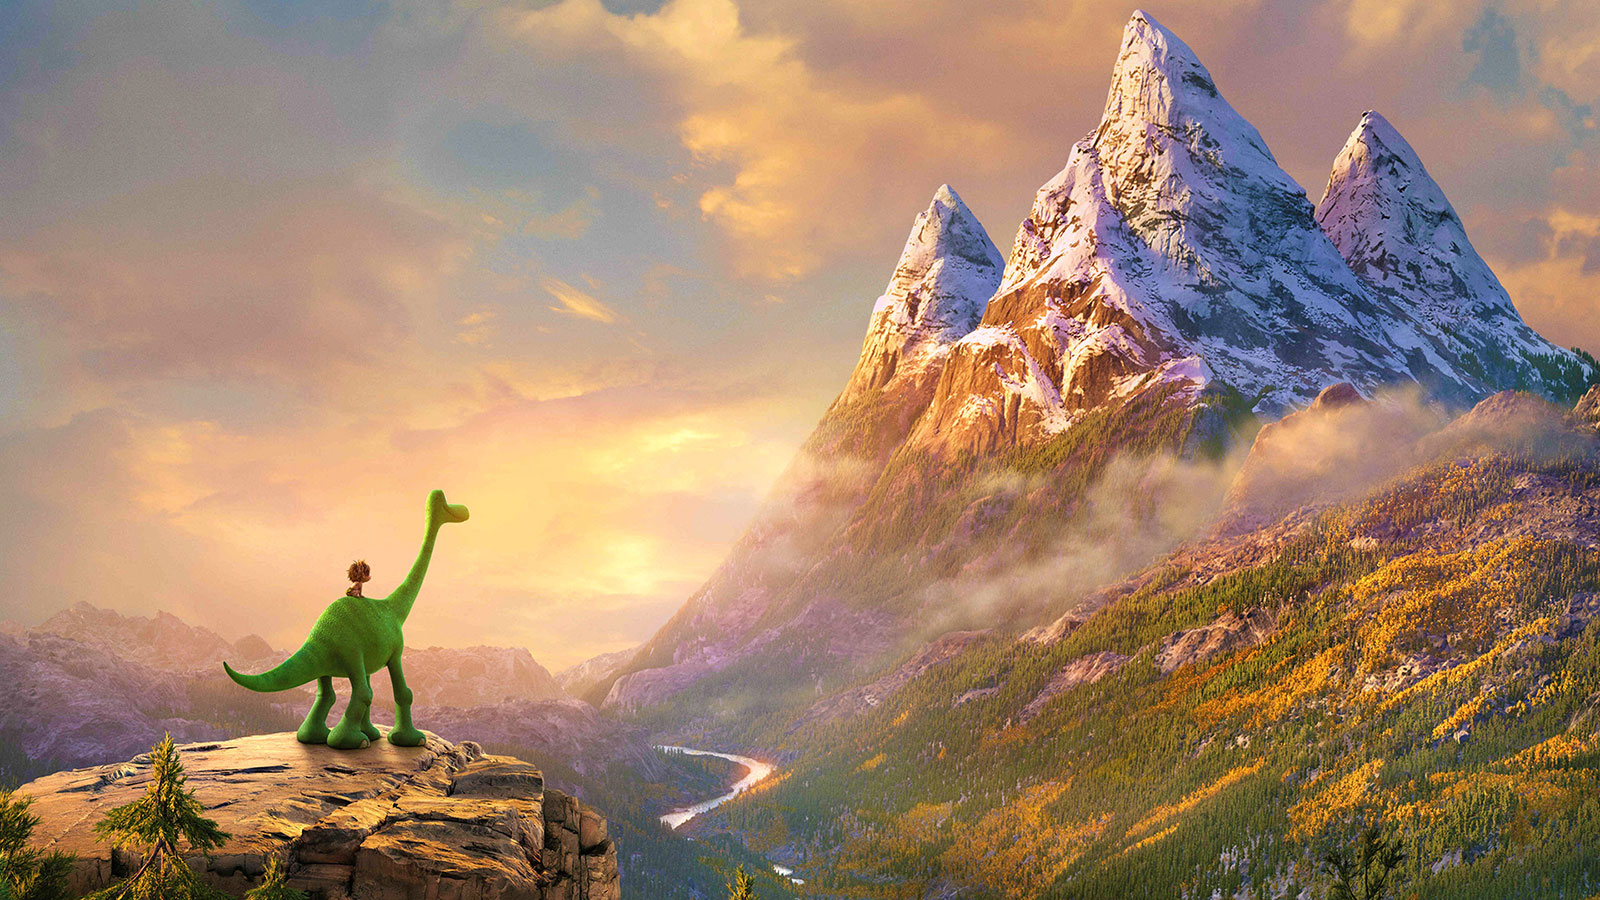 Only a True Pixar Fan Has Watched 18/21 of These Movies The Good Dinosaur